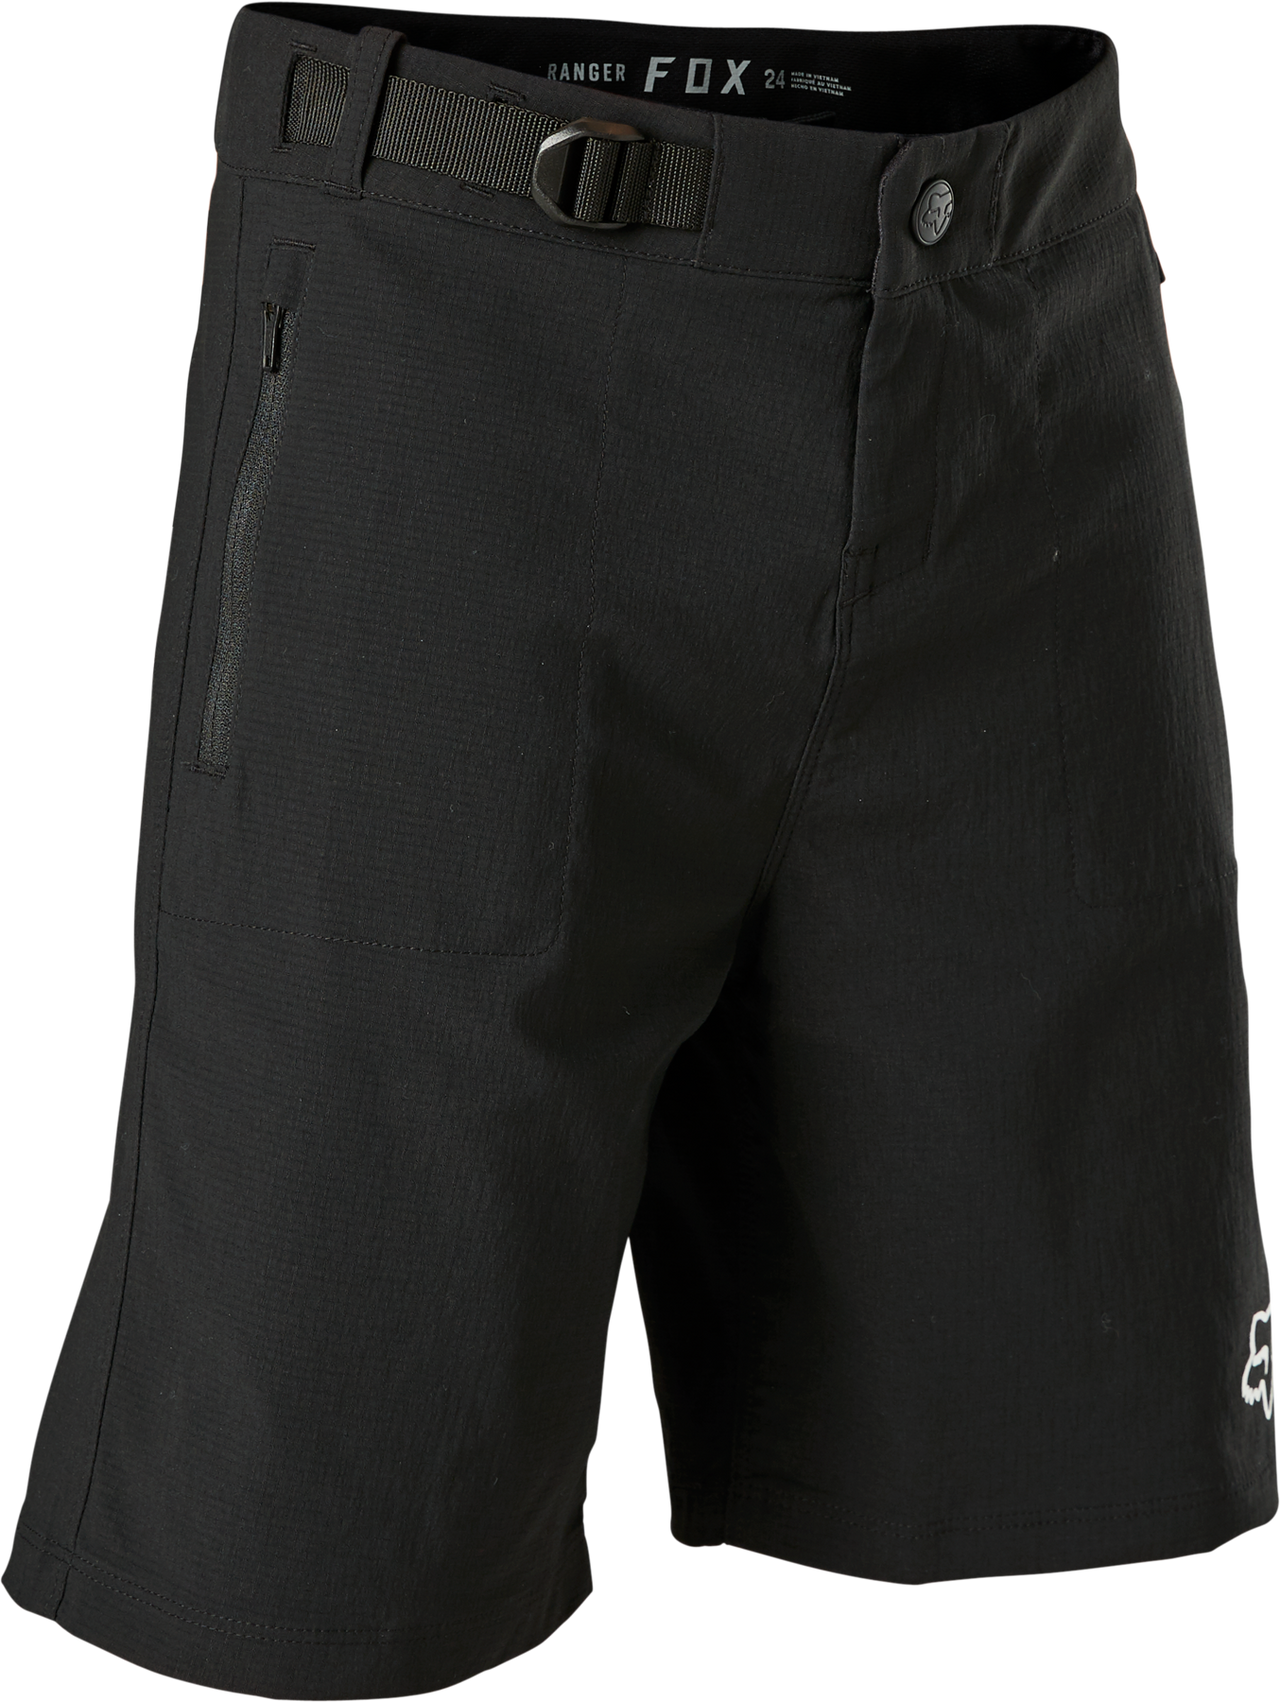 Fox Youth Ranger Shorts With Liner Black